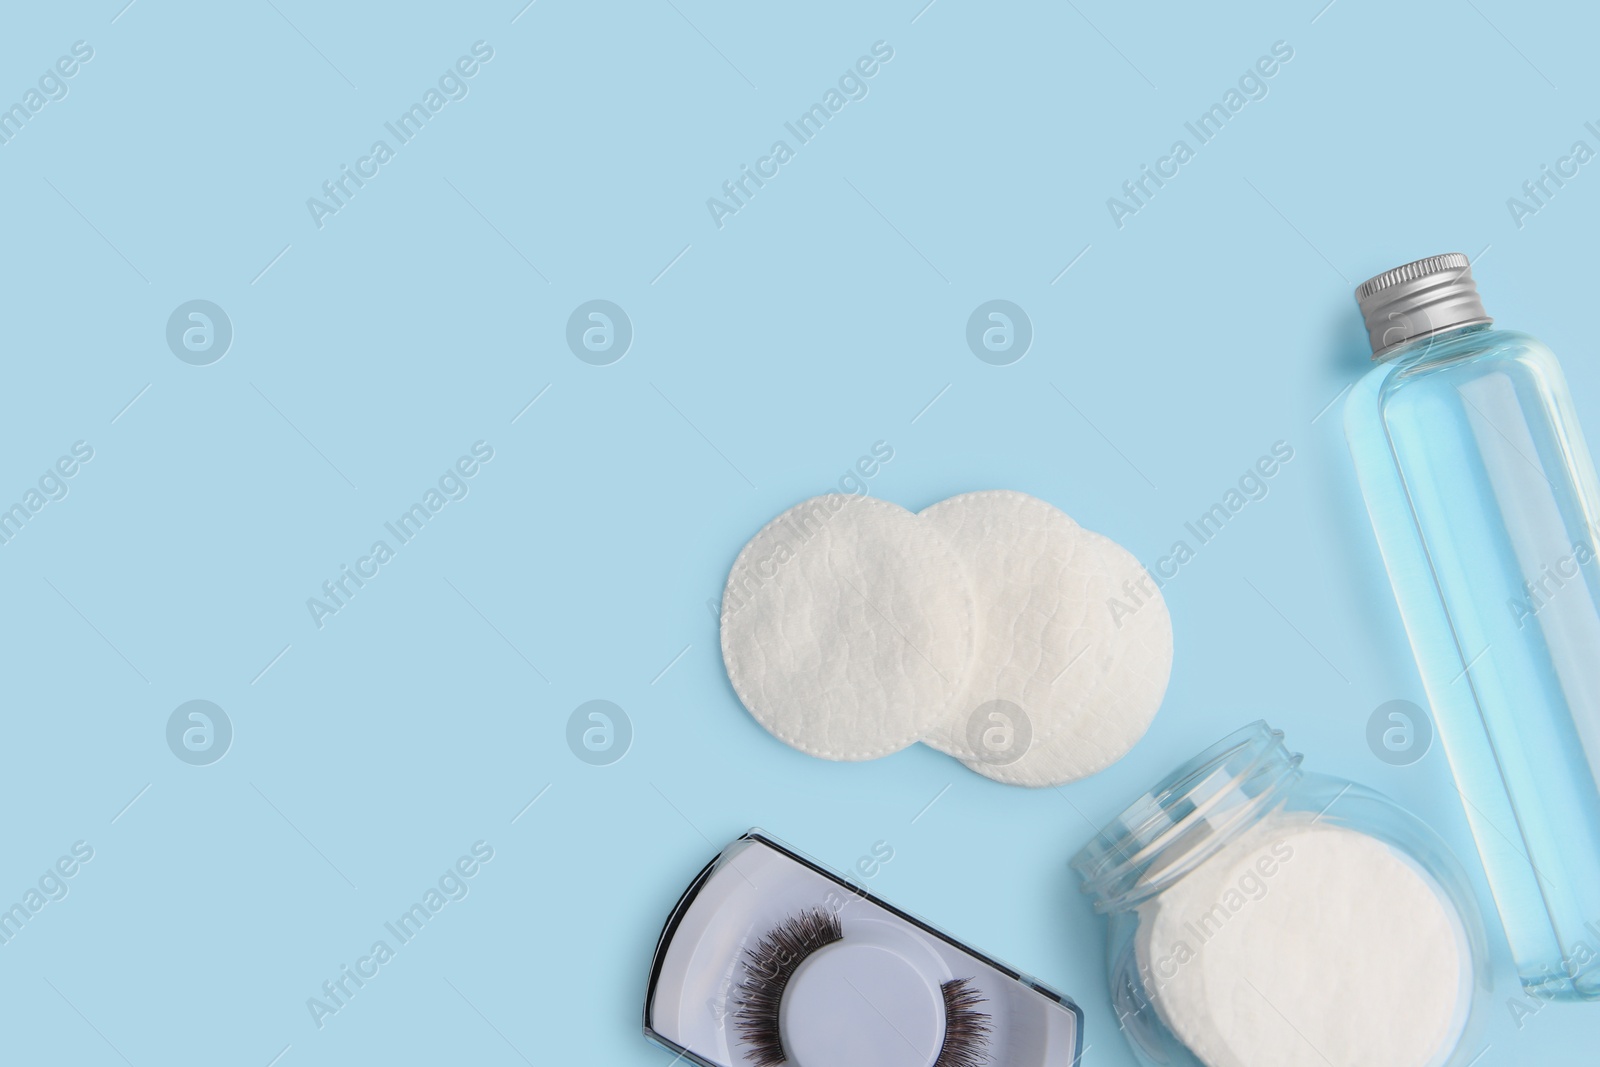 Photo of Bottle of makeup remover, cotton pads and false eyelashes on light blue background, flat lay. Space for text